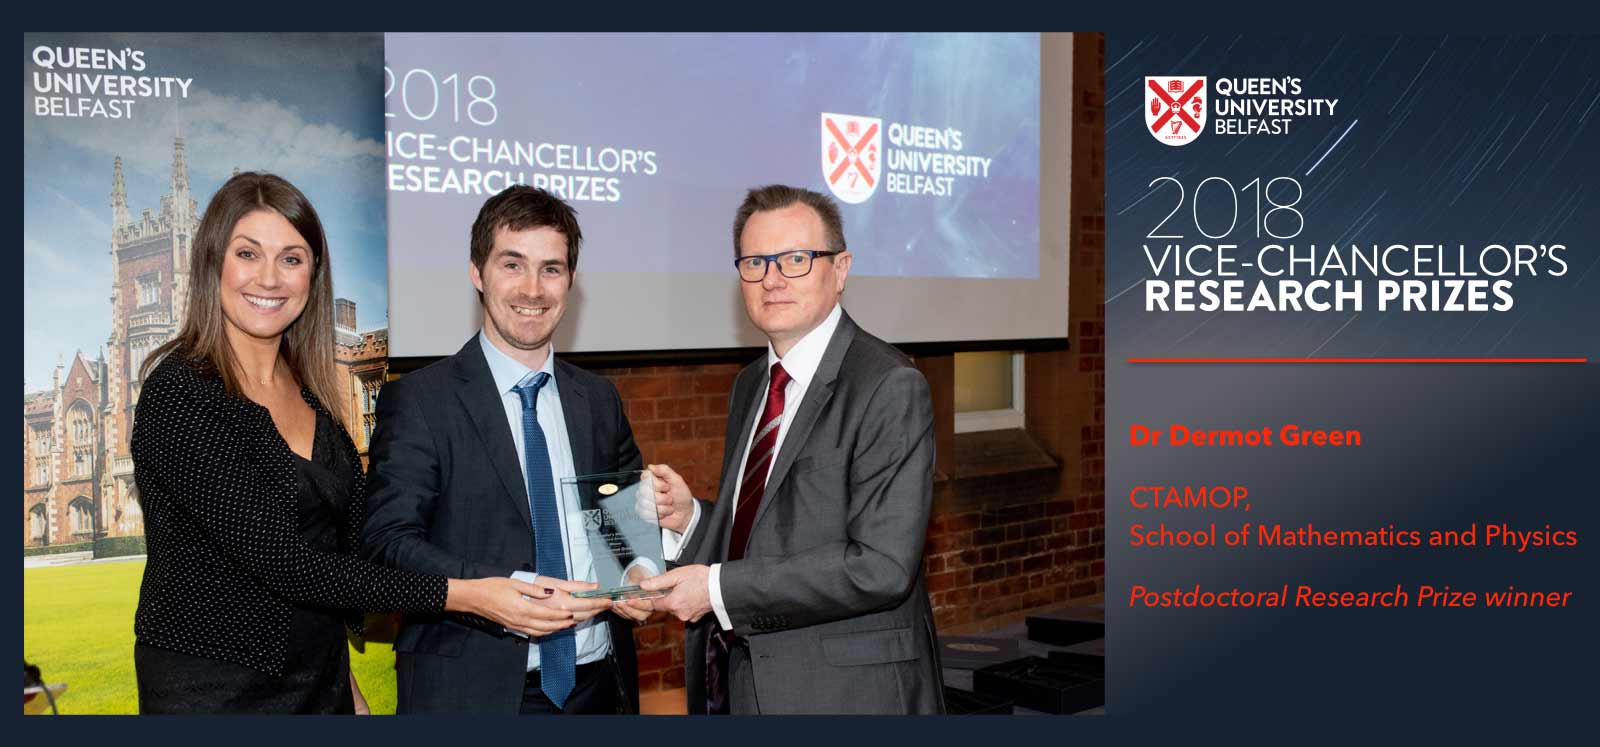 Dermot Green being awarded the 2018 Queen’s University Belfast Vice-Chancellor’s Research Prize 